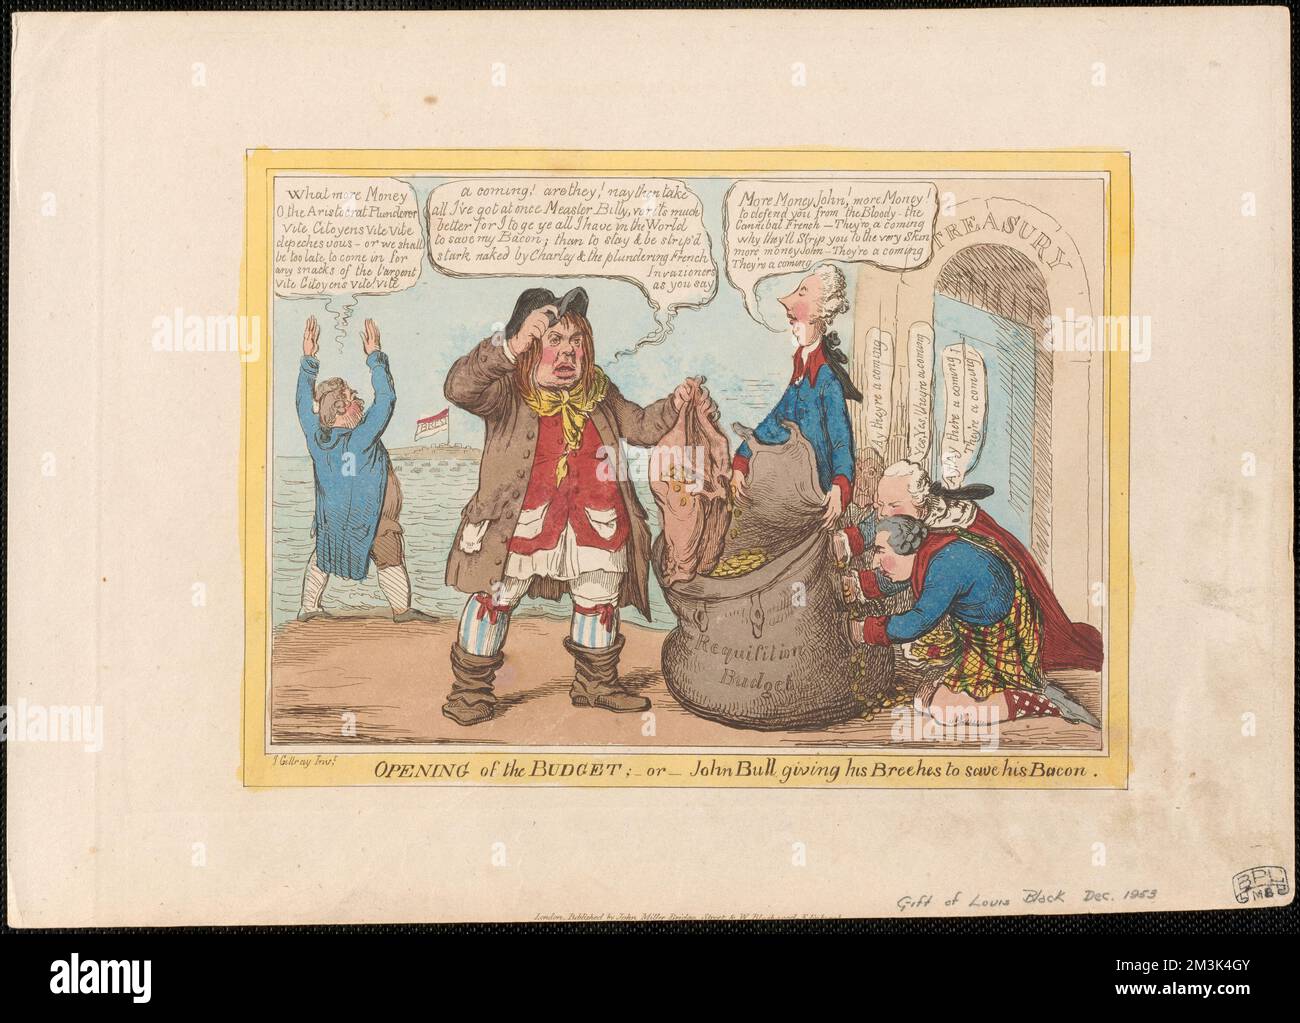 Opening of the budget - or - John Bull giving his breeches to save his bacon , Politicians, Prime ministers, Nobility, Taxes, John Bull Symbolic character, Pitt, William, 1759-1806, Dundas, Henry, 1742-1811, Fox, Charles James, 1749-1806, Burke, Edmund, 1729-1797, Grenville, William Wyndham Grenville, Baron, 1759-1834. James Gillray (1756-1815). Prints and Drawings Stock Photo